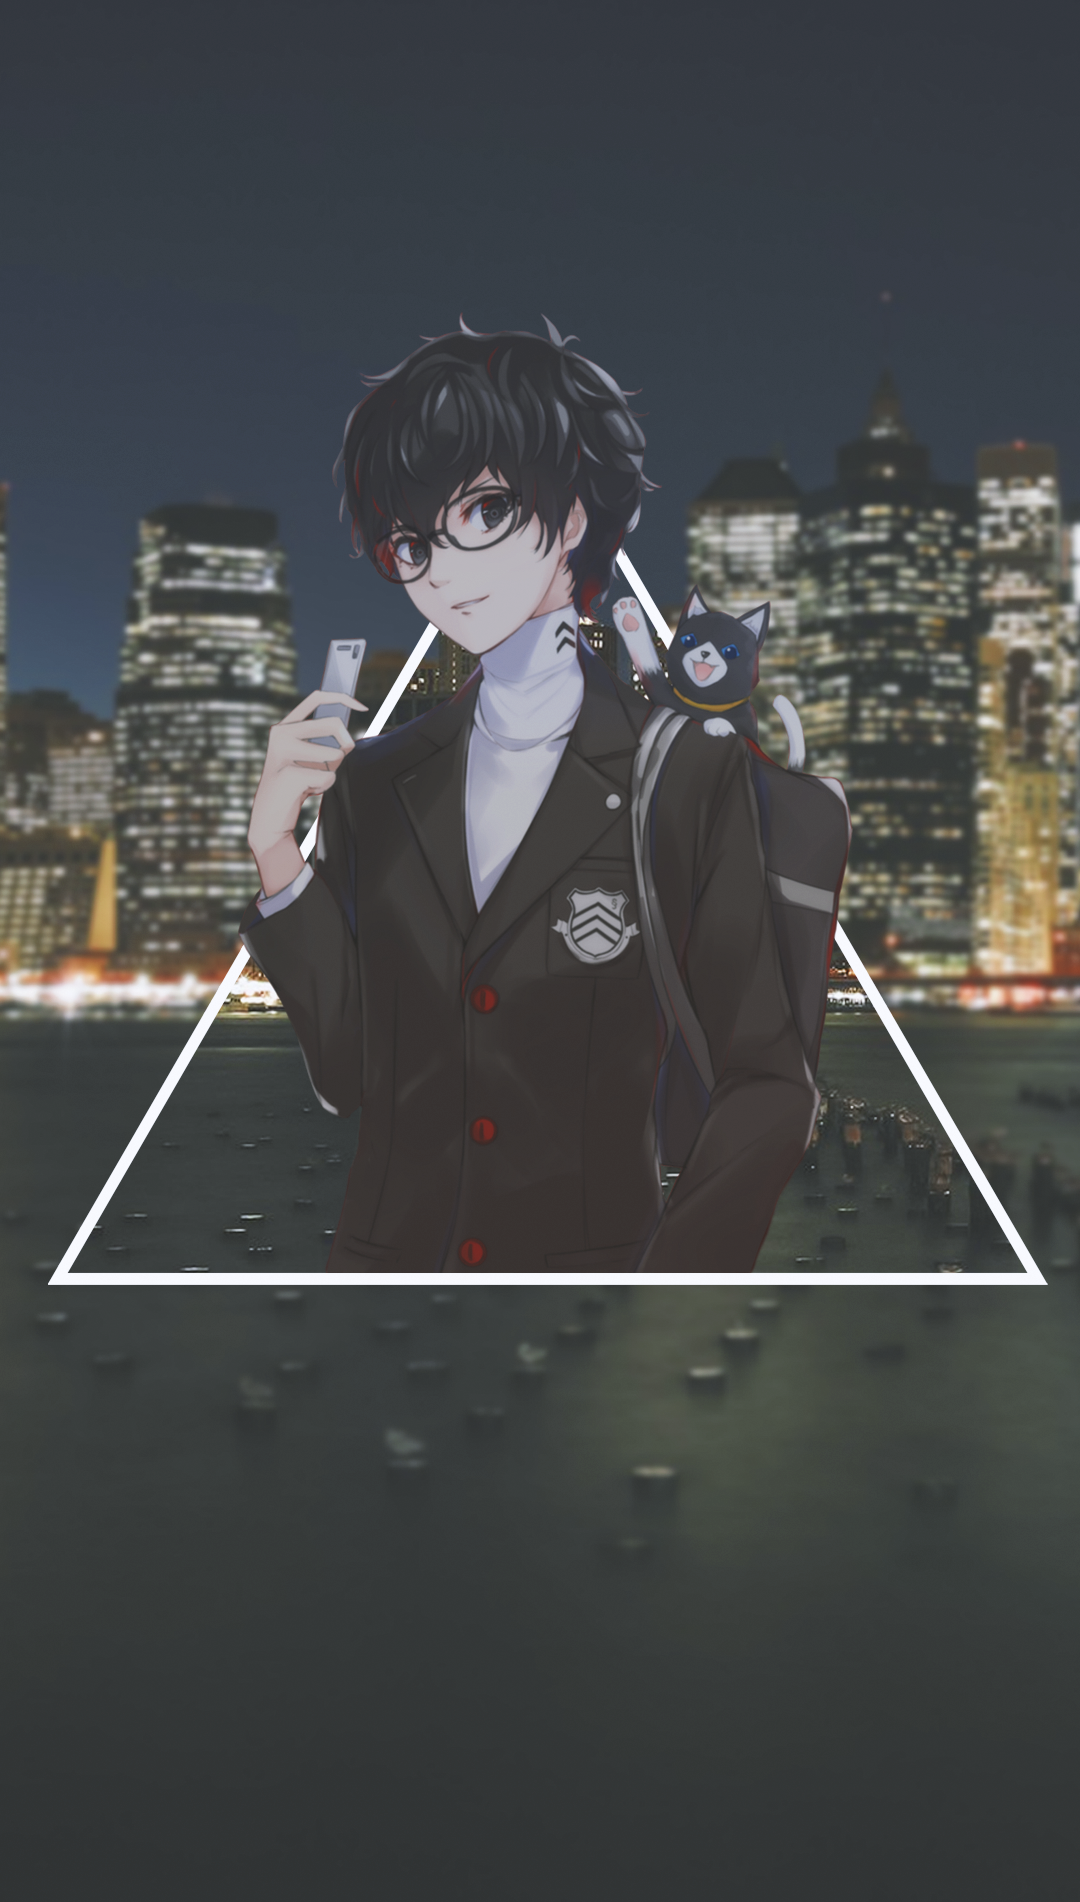 Anime 1080x1902 anime anime boys picture-in-picture Persona series Persona 5 Protagonist (Persona 5)